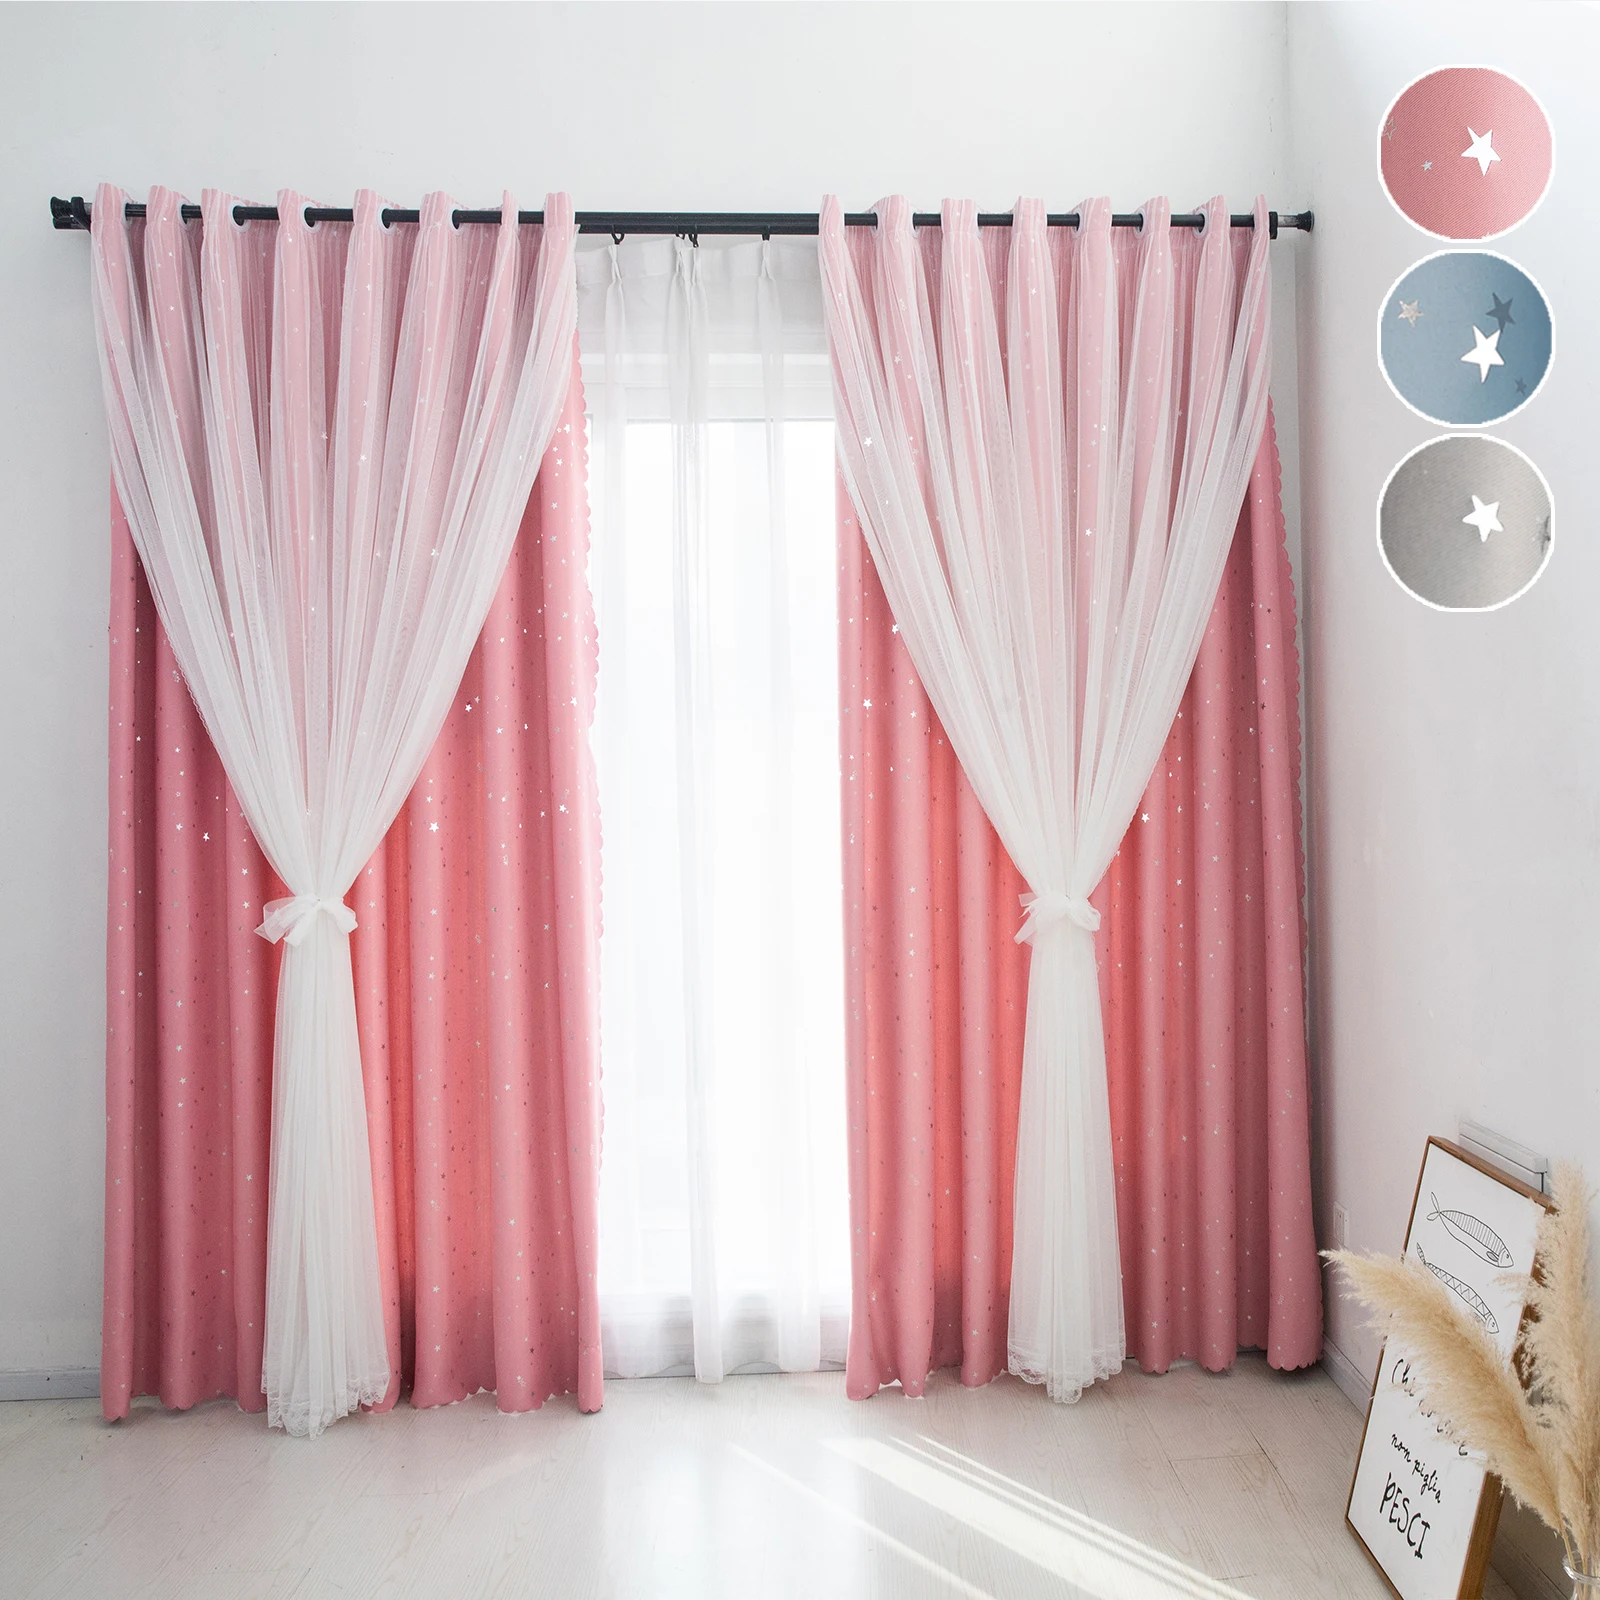 Double-Layer Curtains for Living Room Bow Yarn Tulle Stars Printed Panel Drapes Sound Proof Eyelet Bedroom Curtain Home Decor